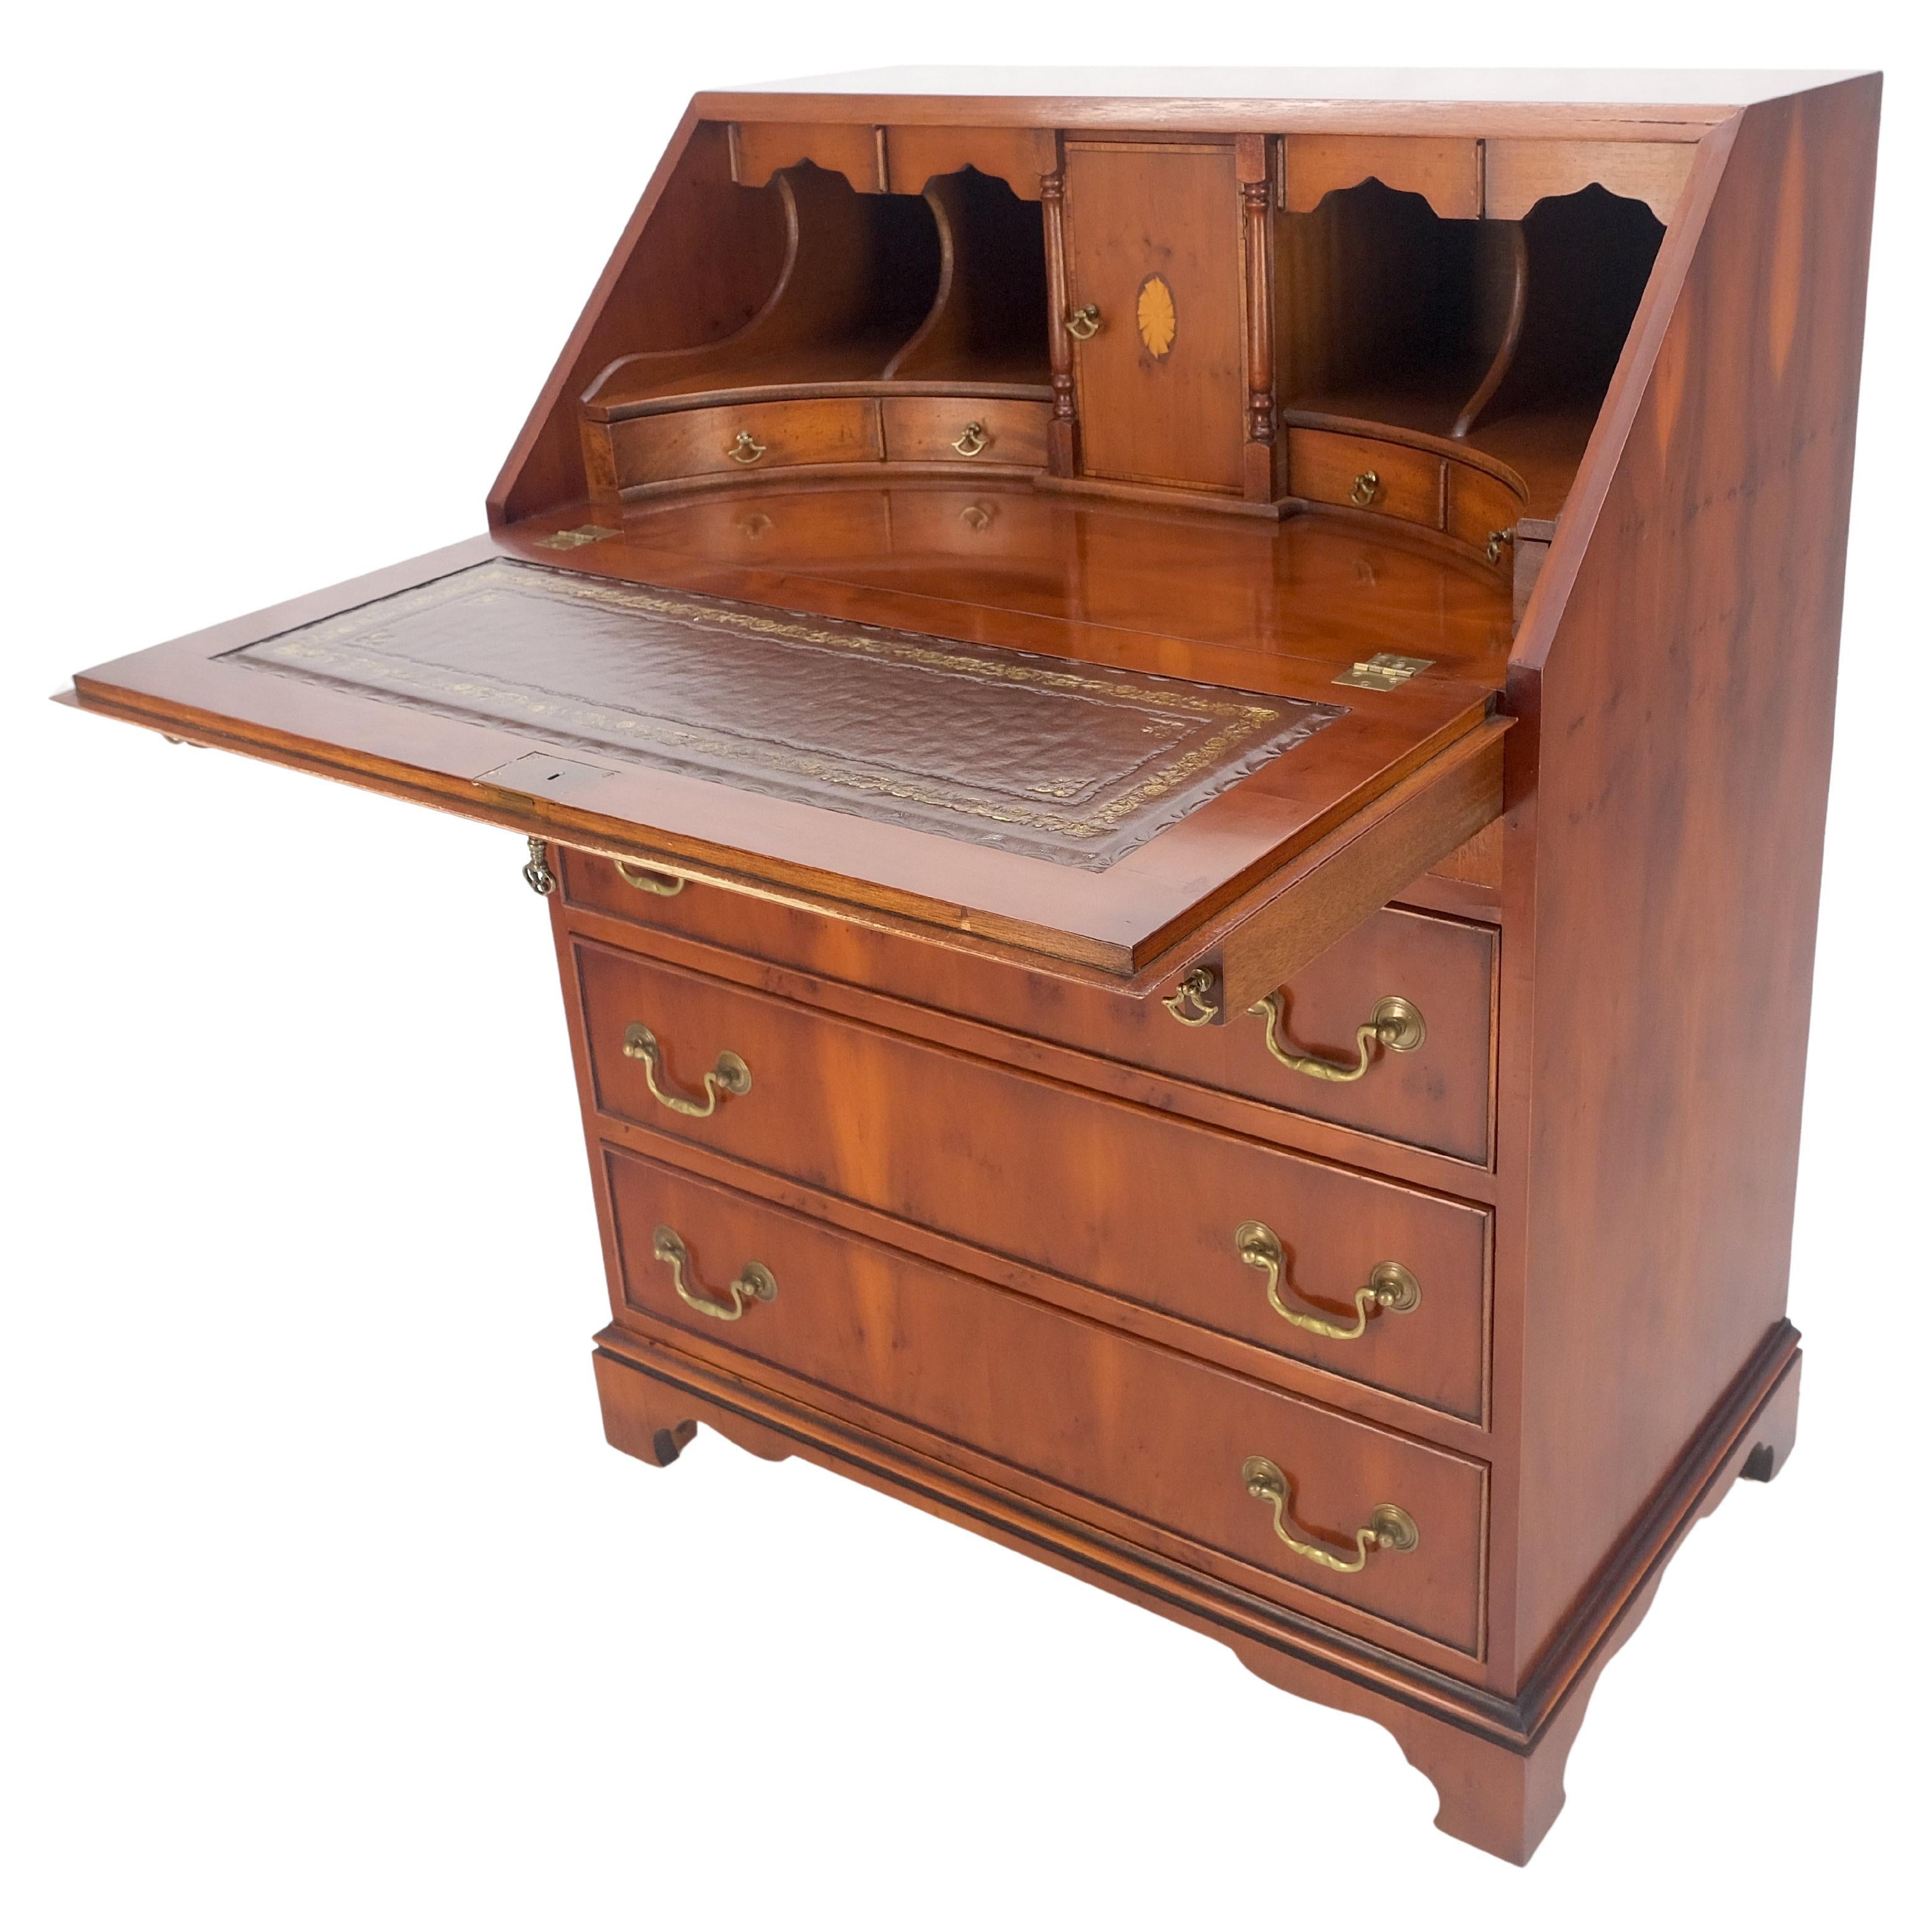 Yew Wood Leather Top Drop Front Secretary Desk 3 Drawers Brass Hardware MINT !